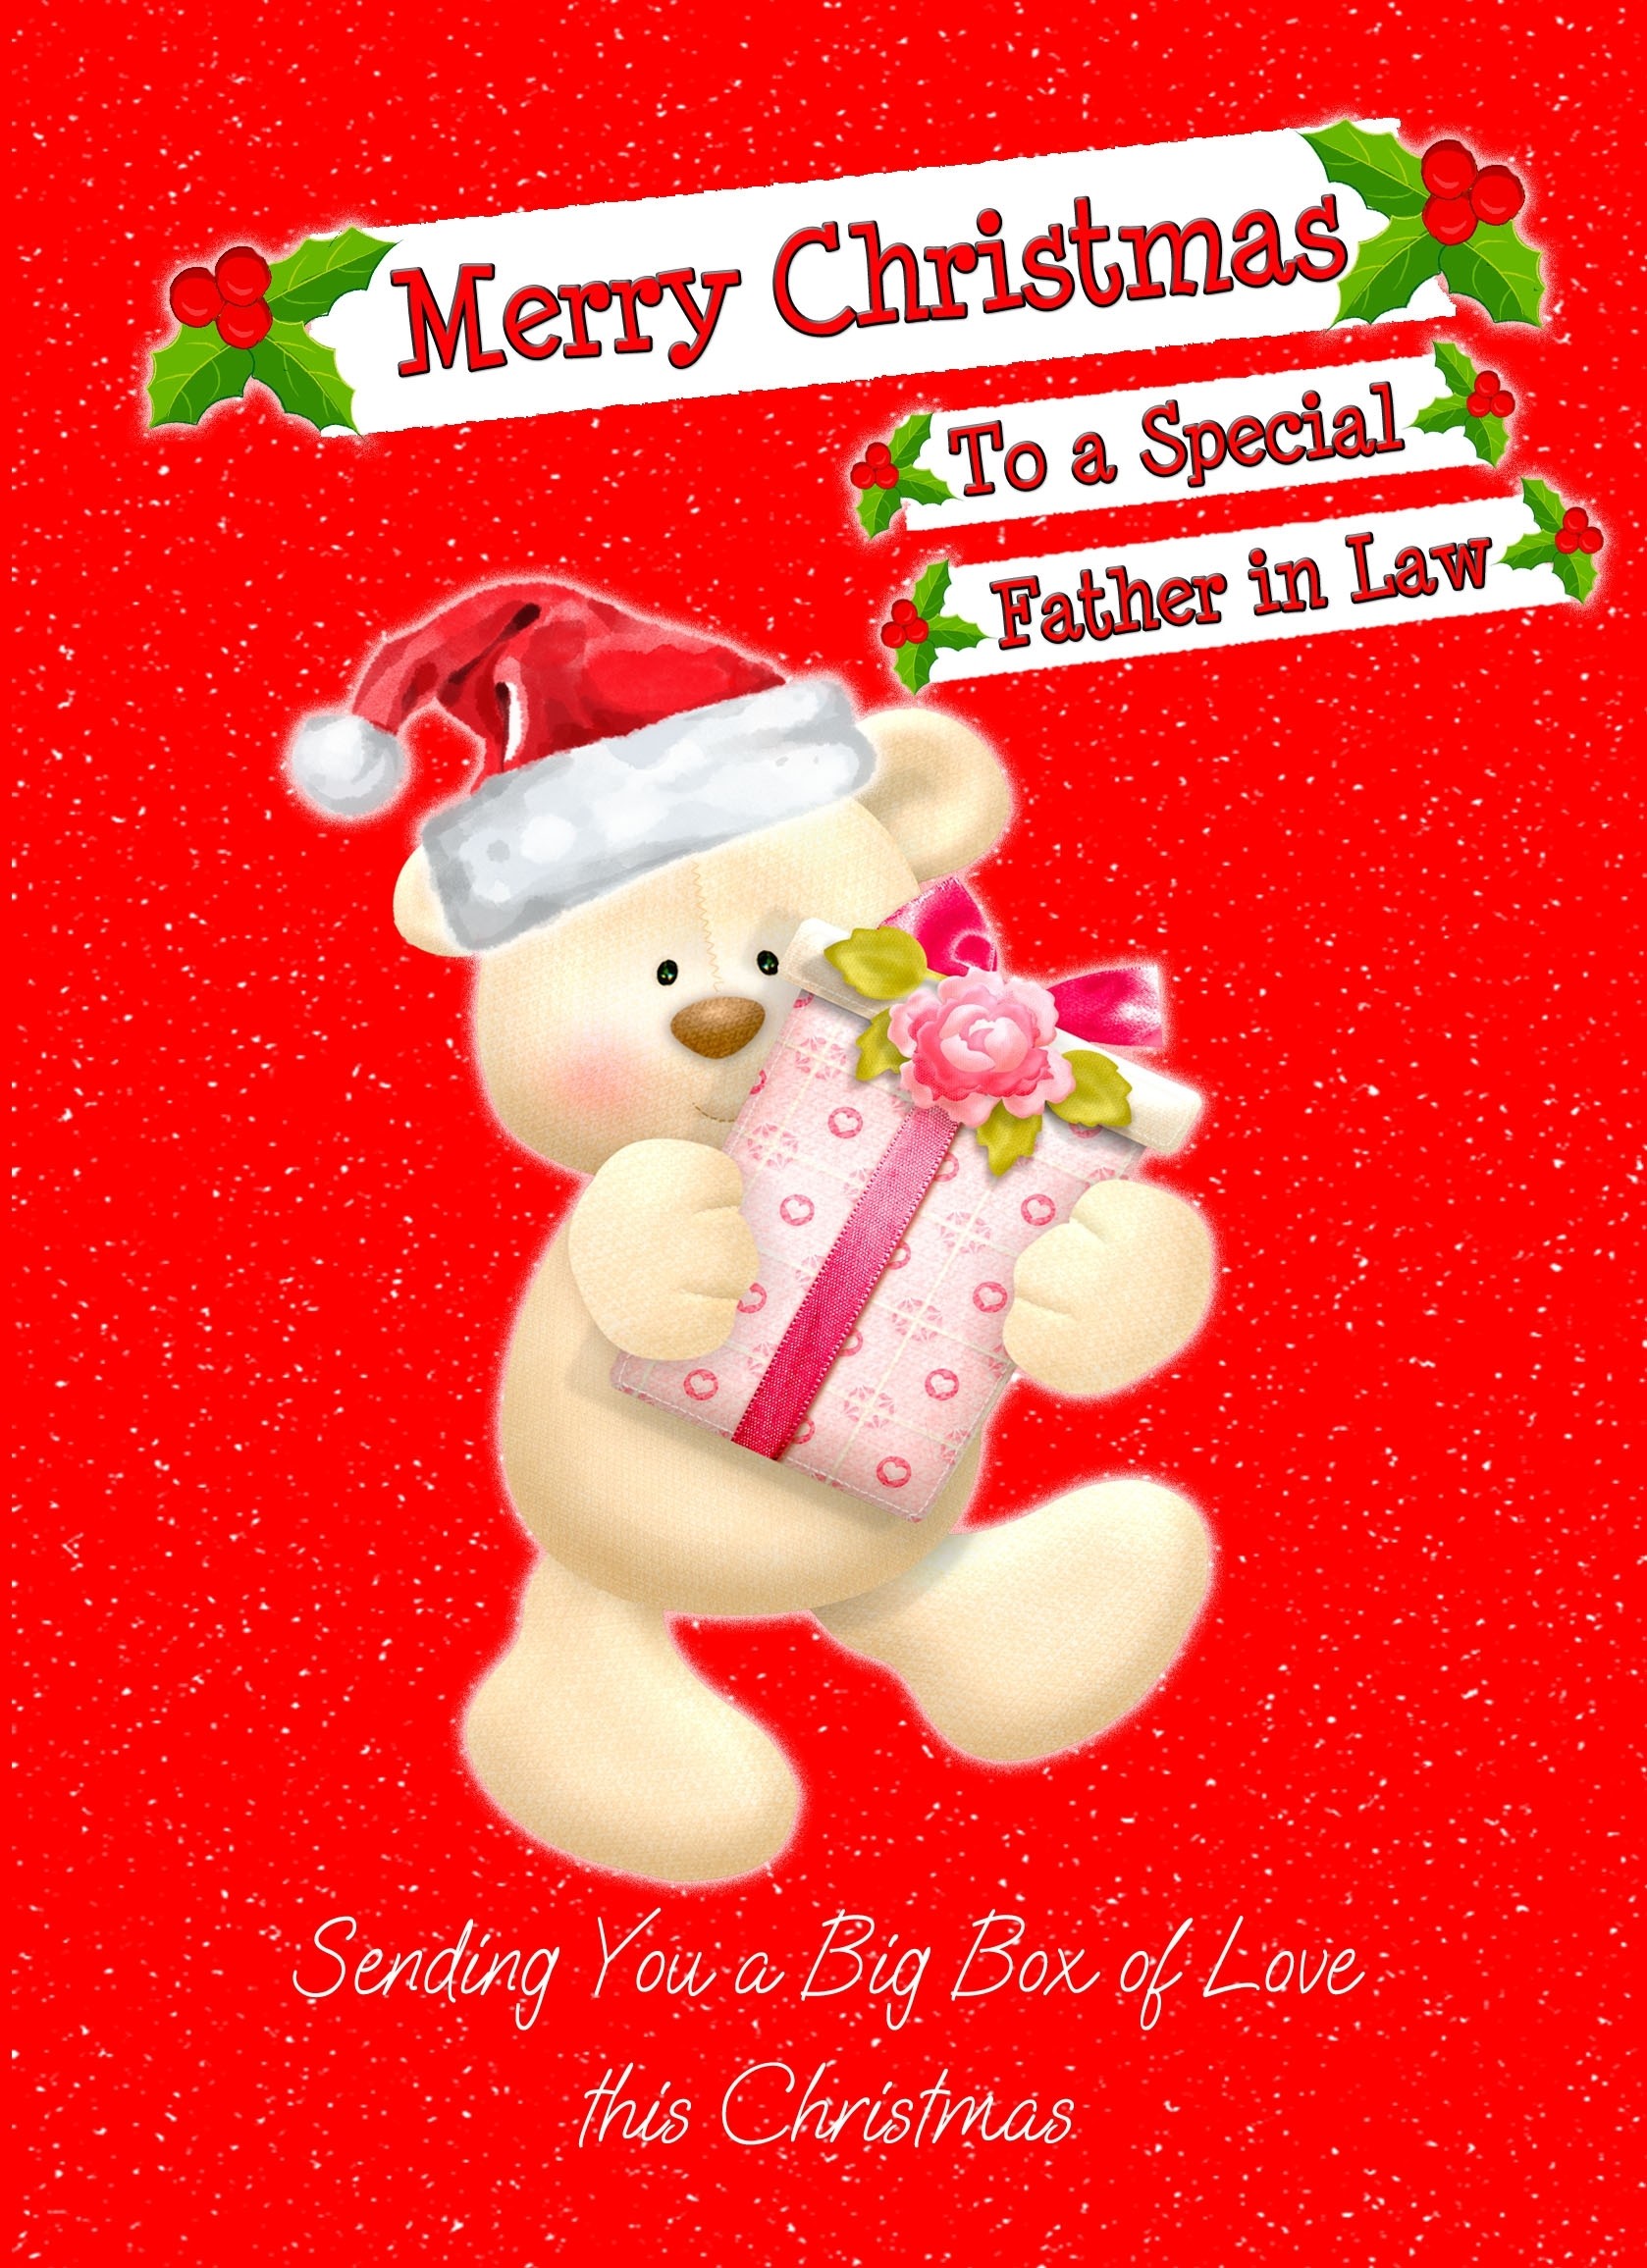 Christmas Card For Father in Law (Red Bear)